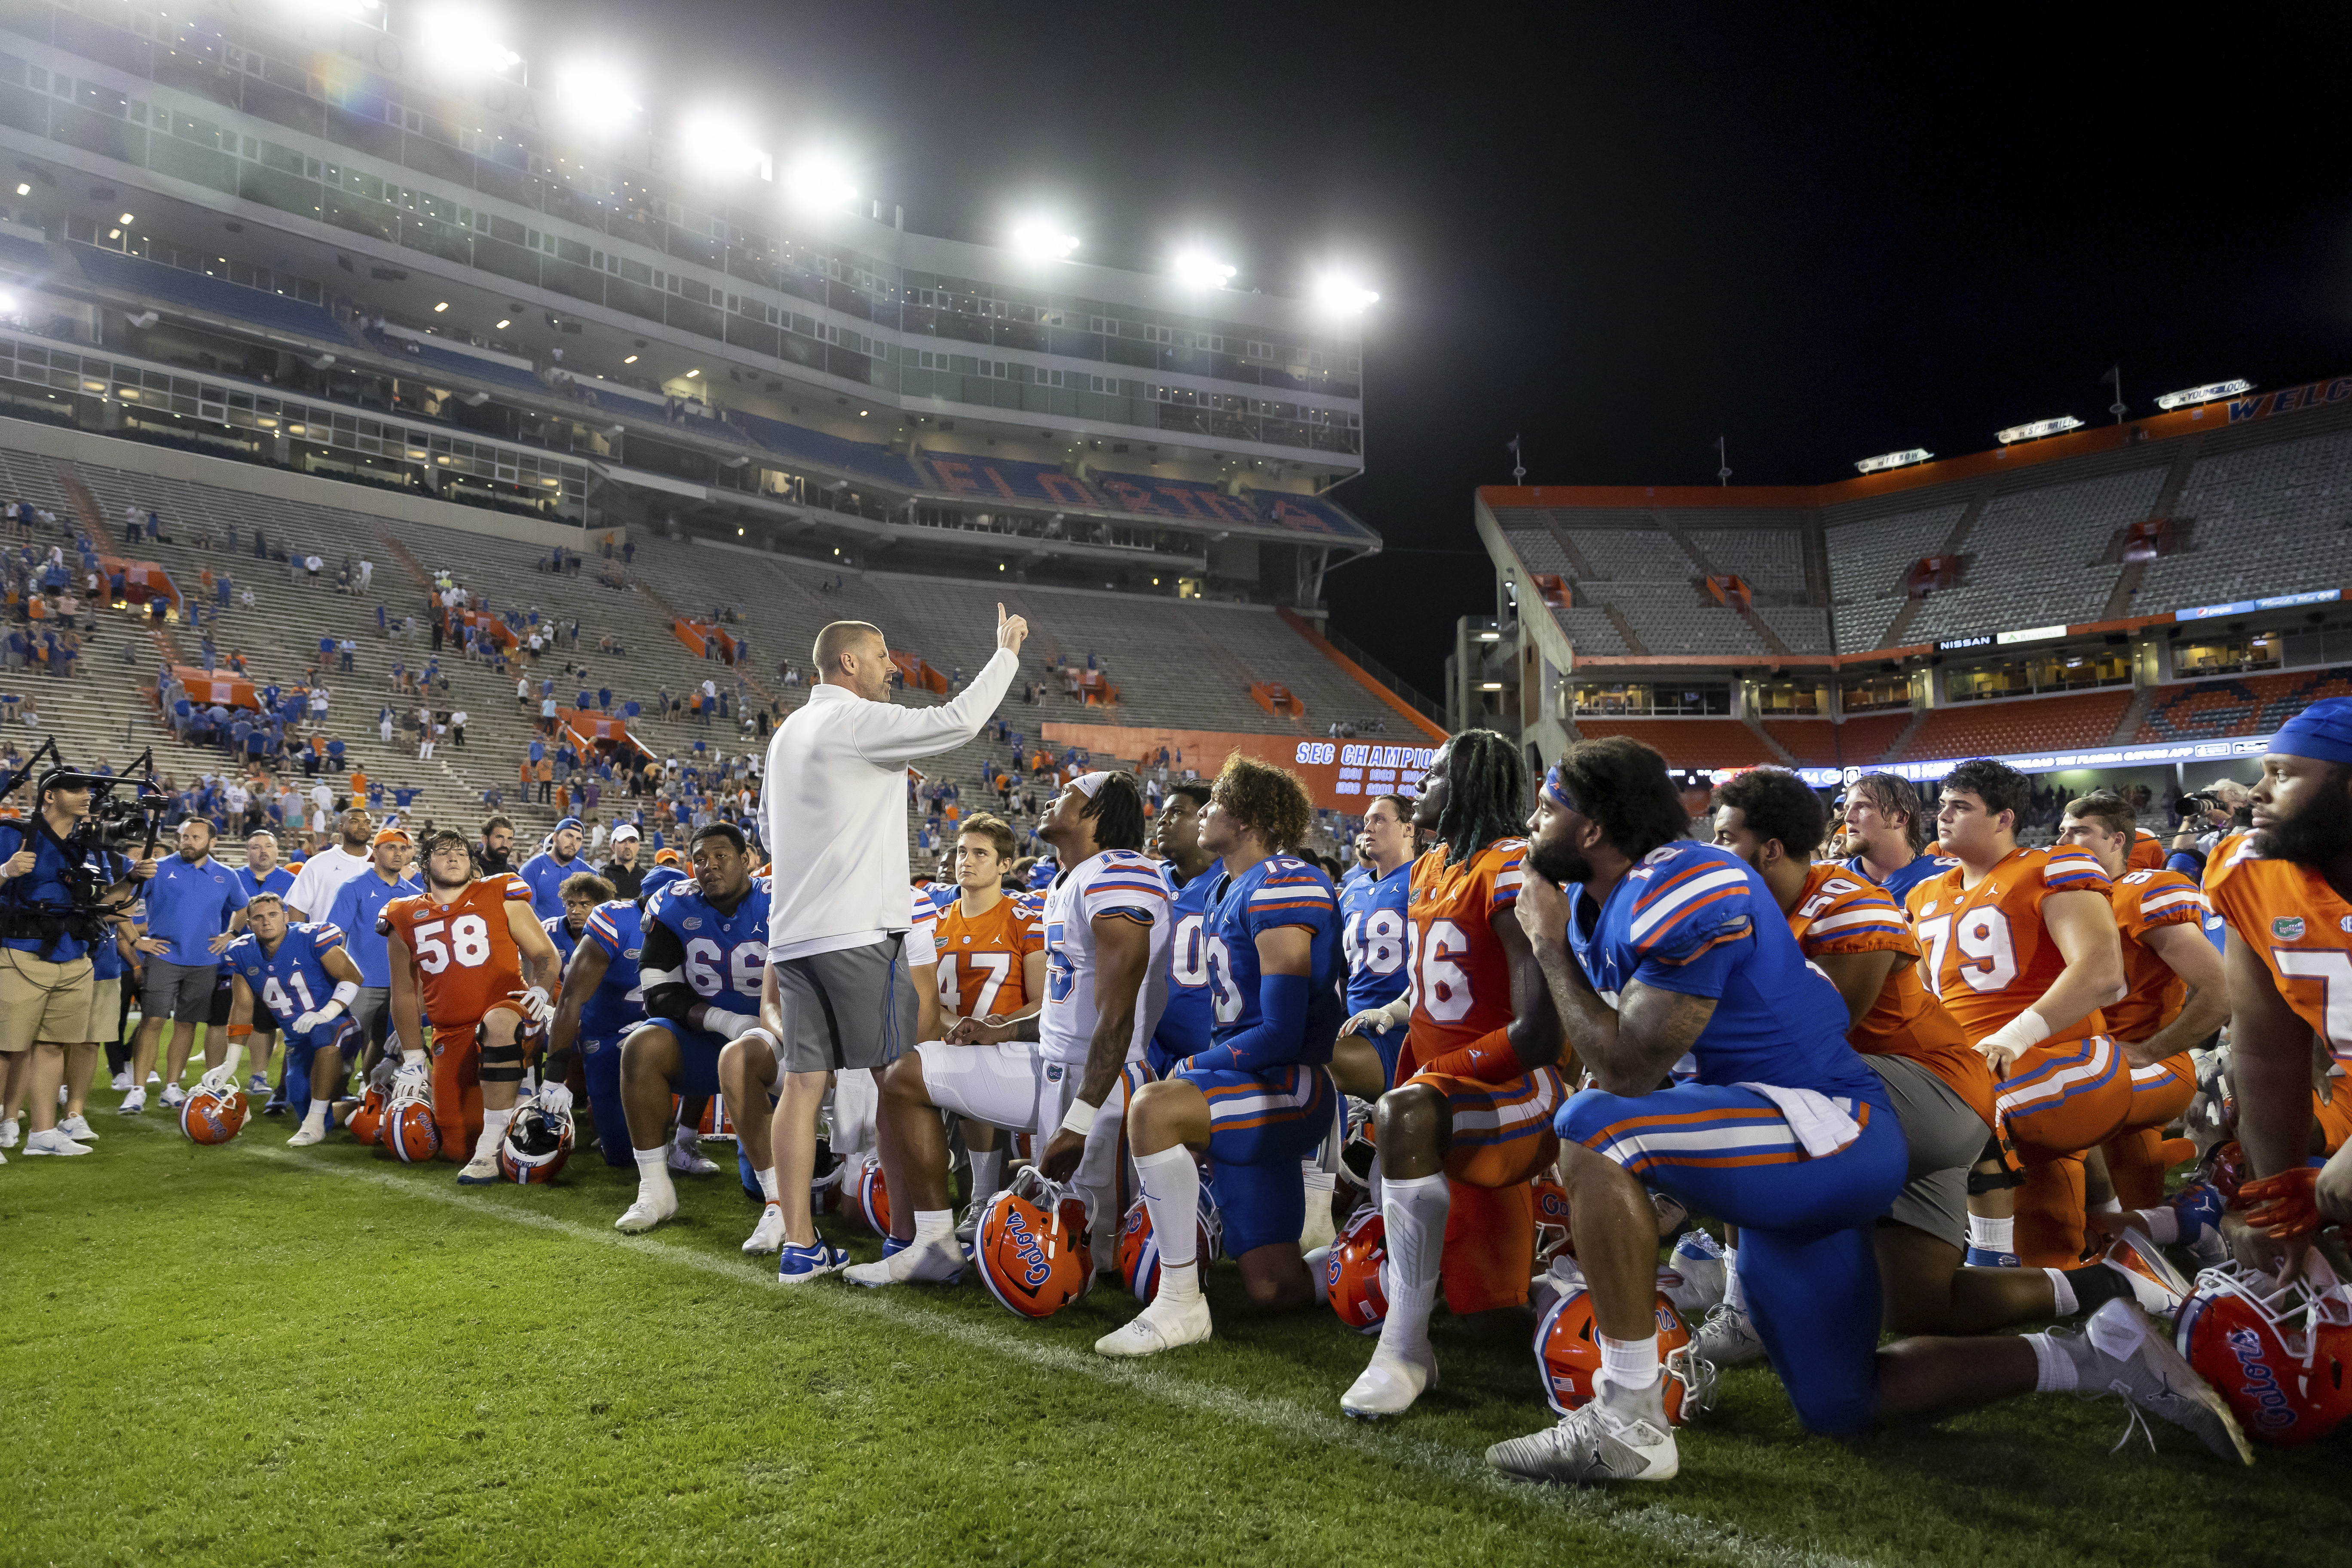 What do we know about the 2022 Florida Gators so far? - Alligator Army